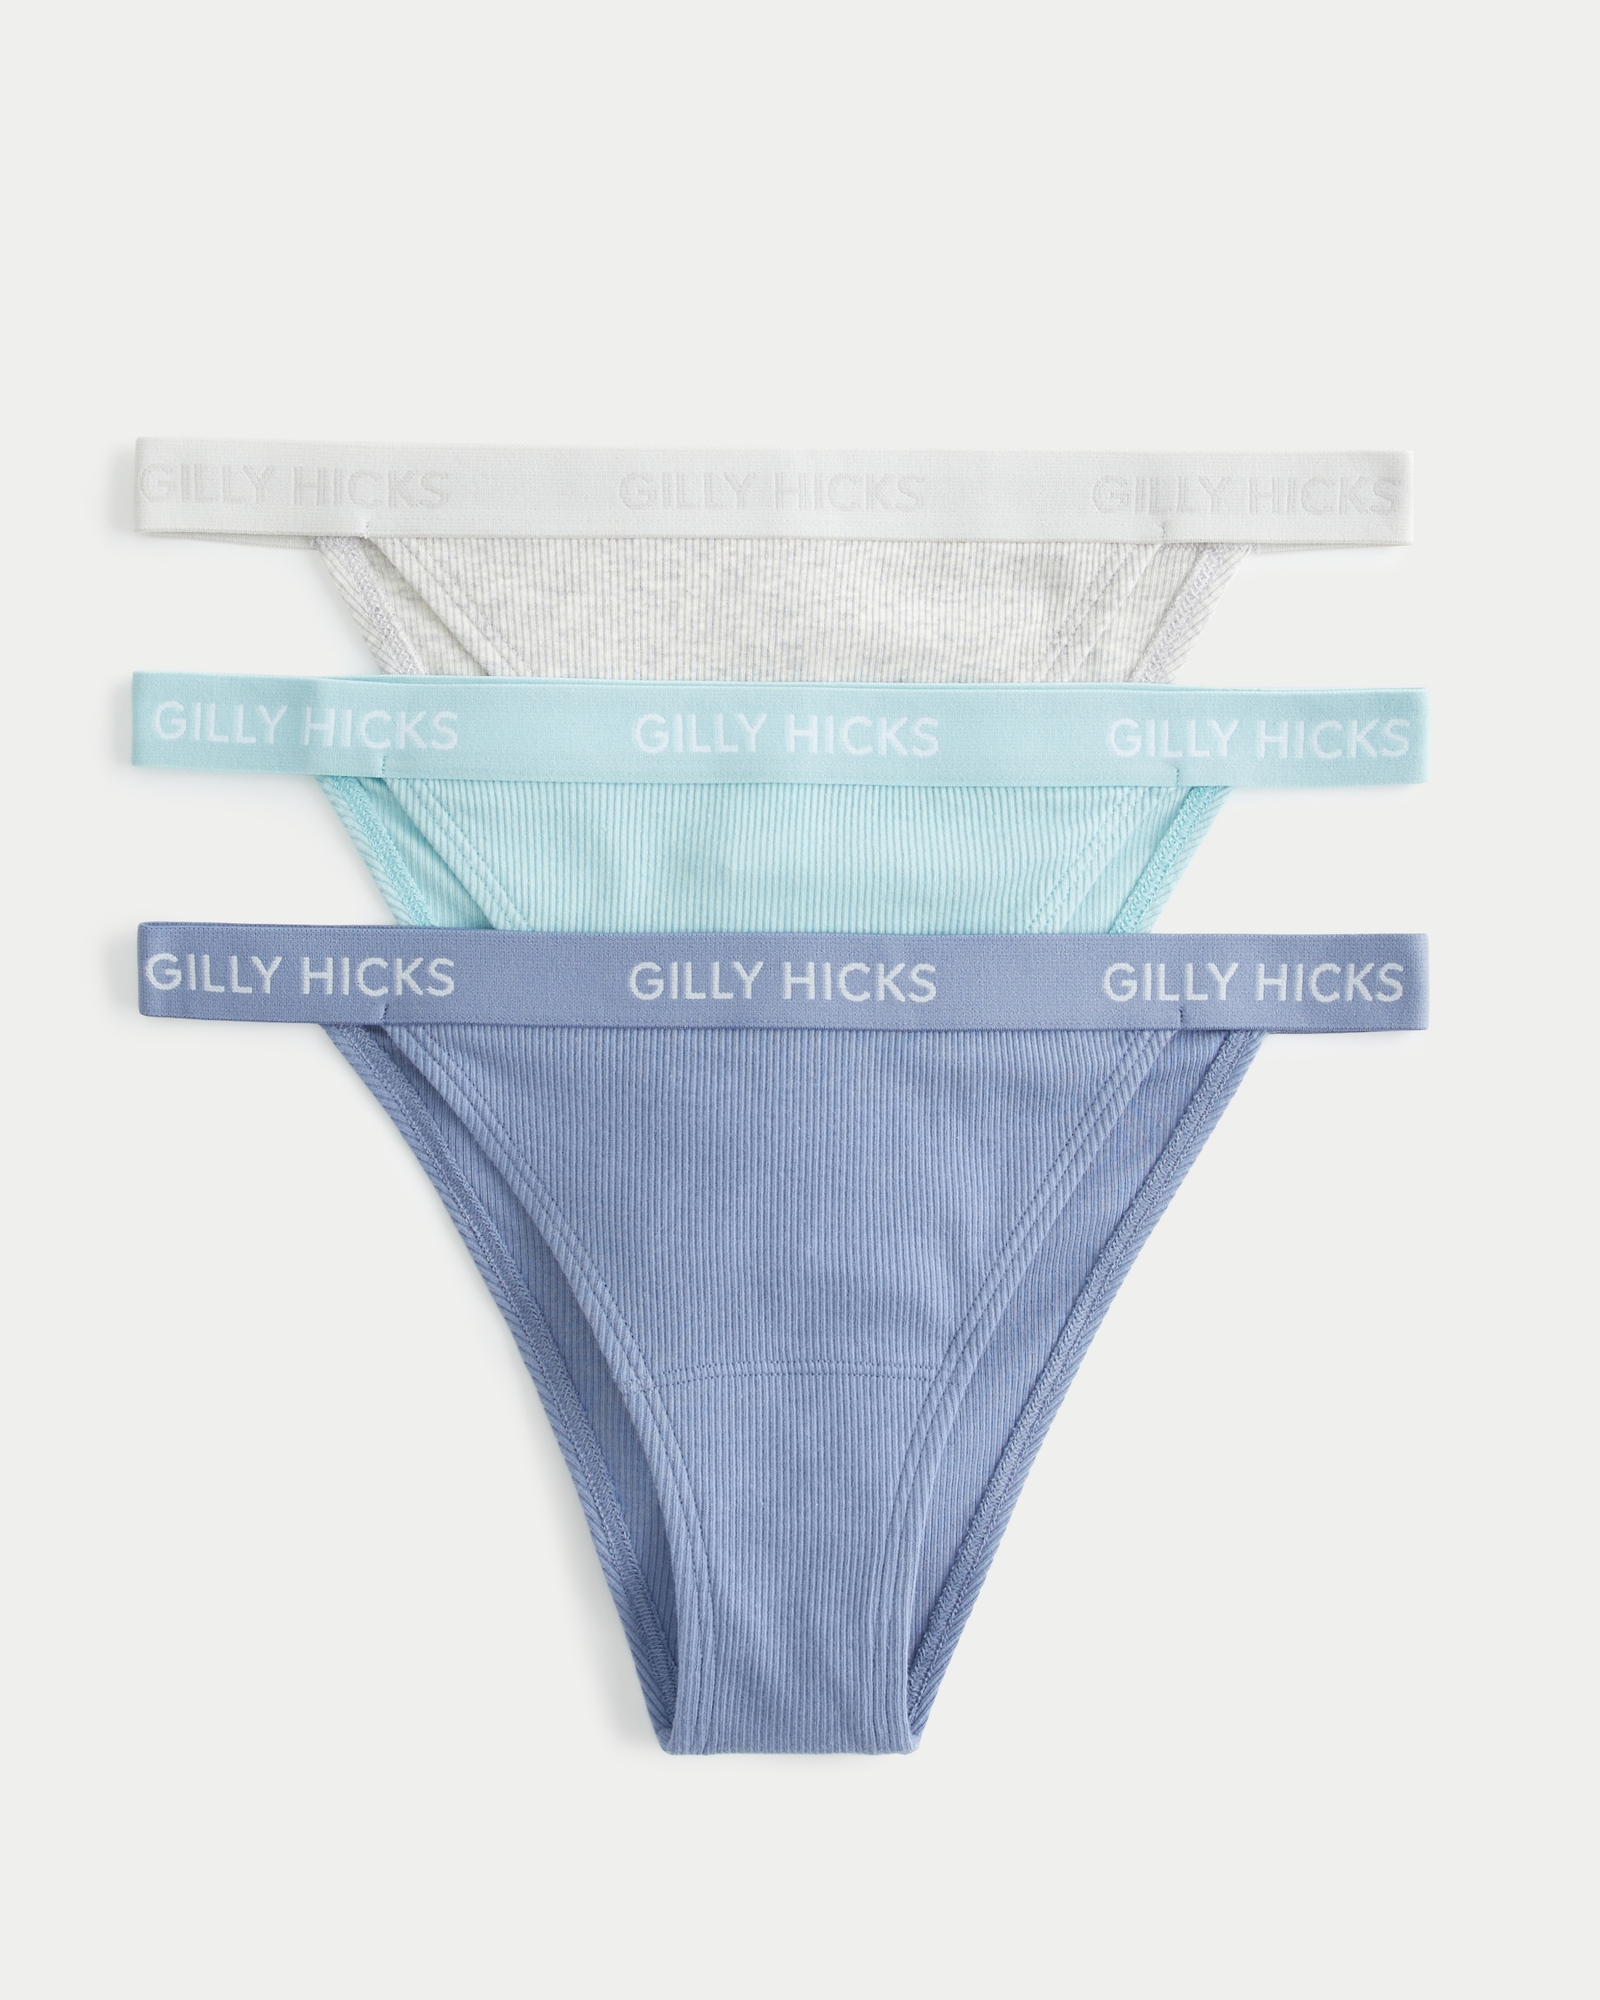 Gilly Hicks rib logo cotton short briefs in grey - ShopStyle Knickers